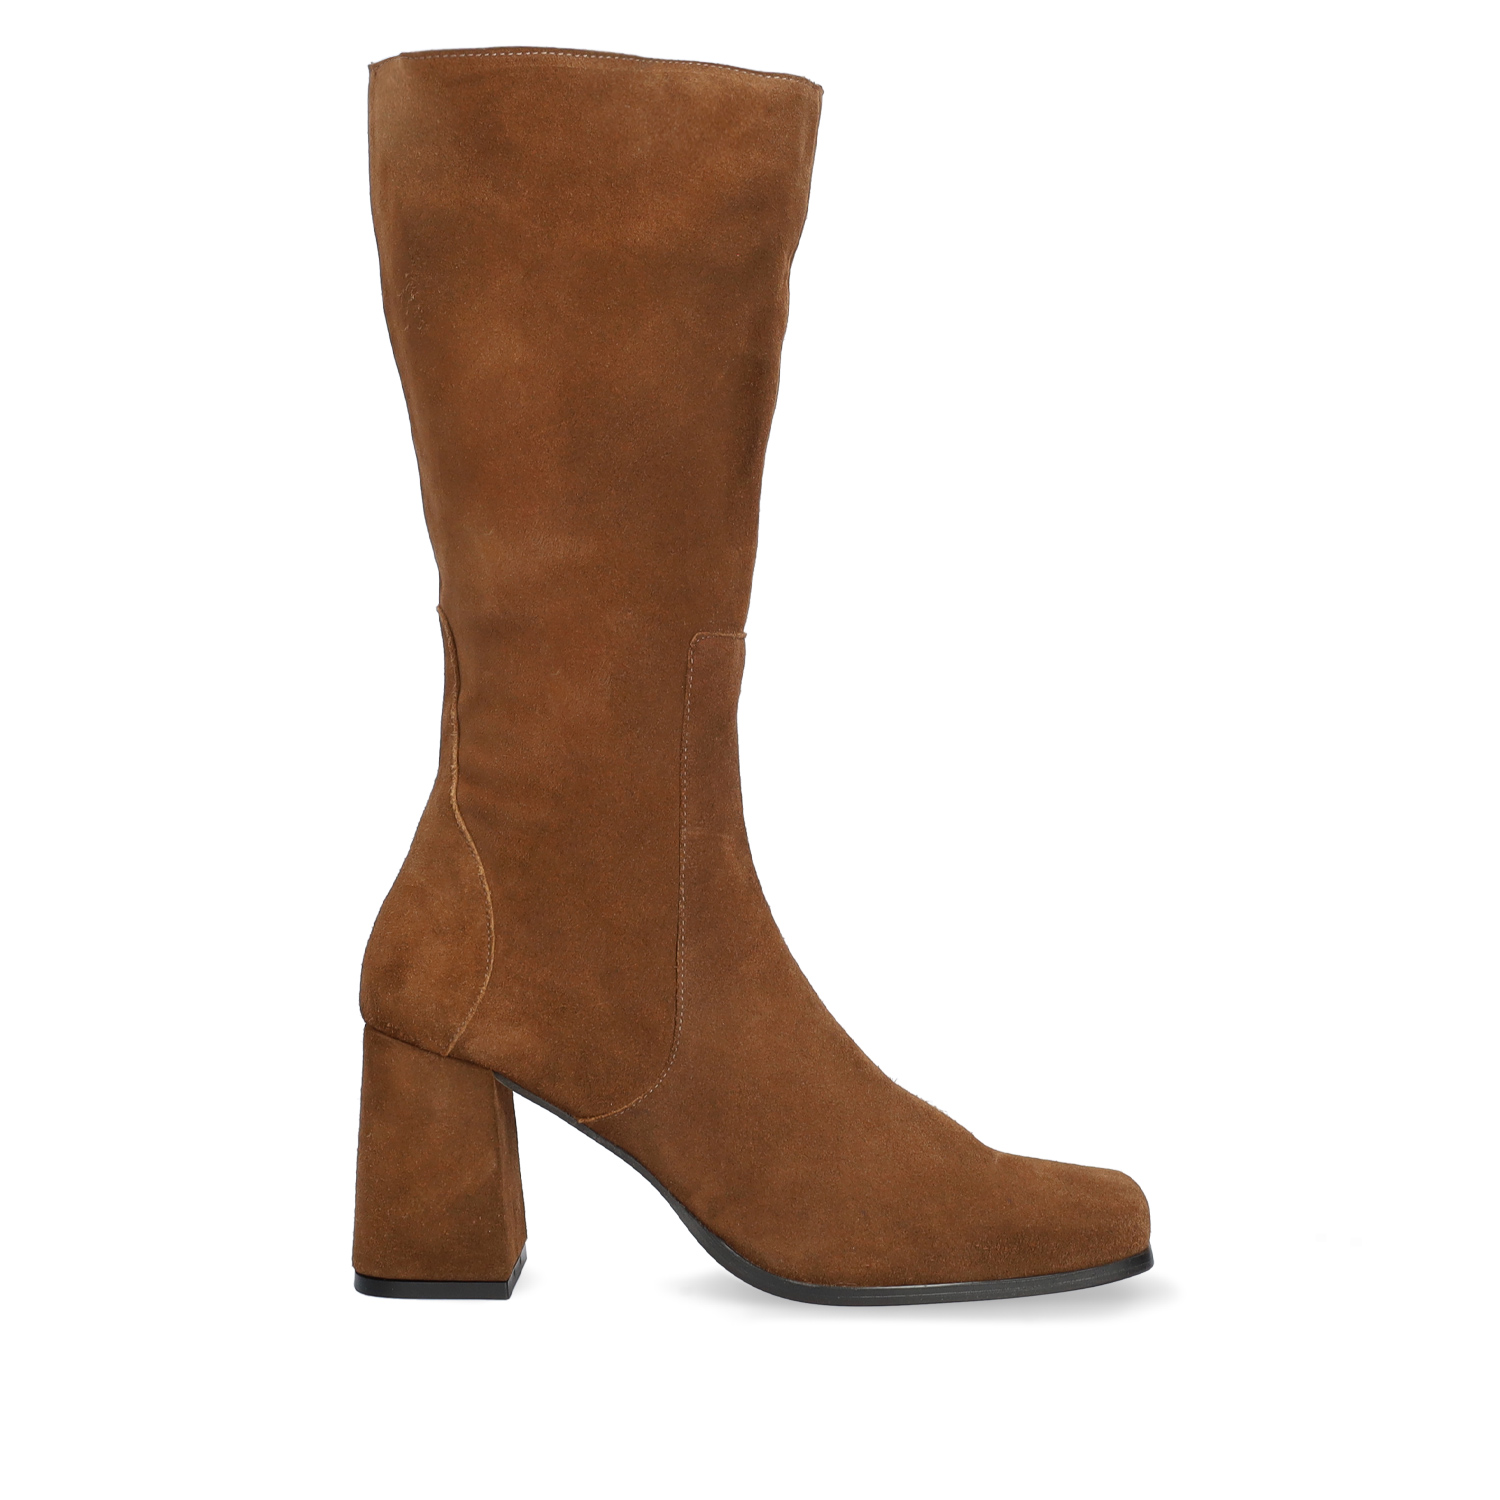 Heeled boots in cognac leather 